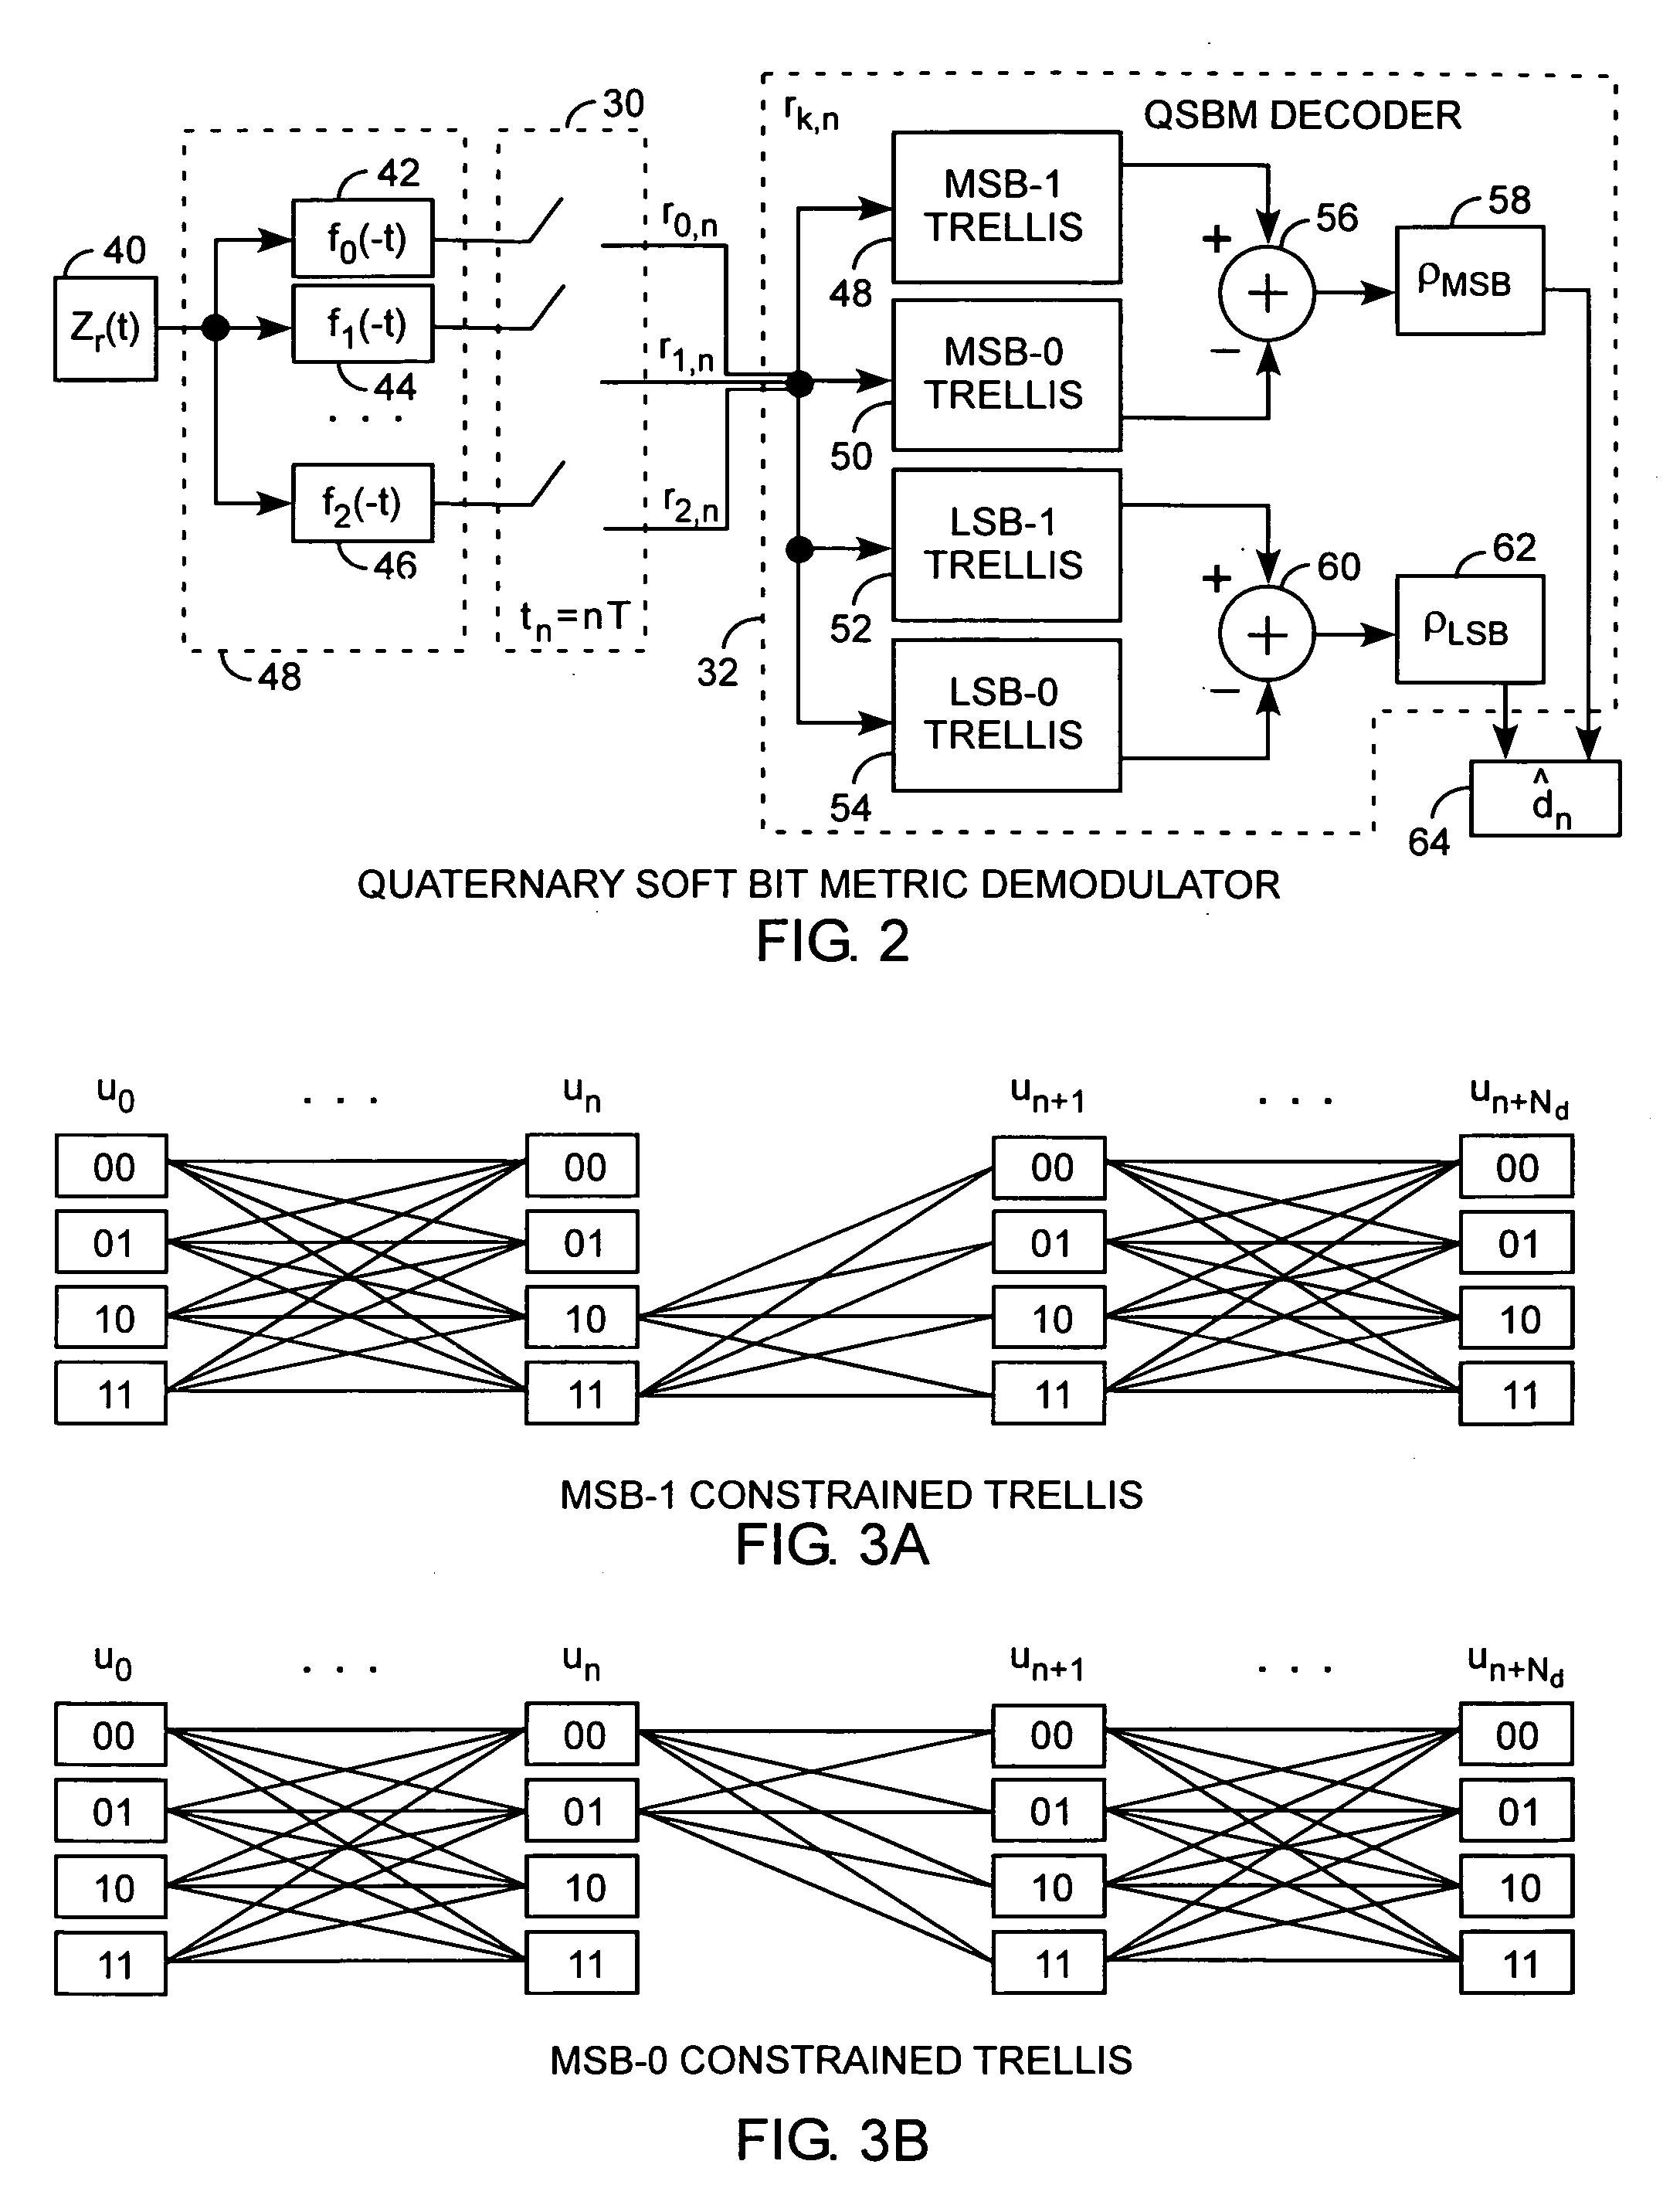 Quaternary precoded continuous phase modulation soft bit metric demodulator